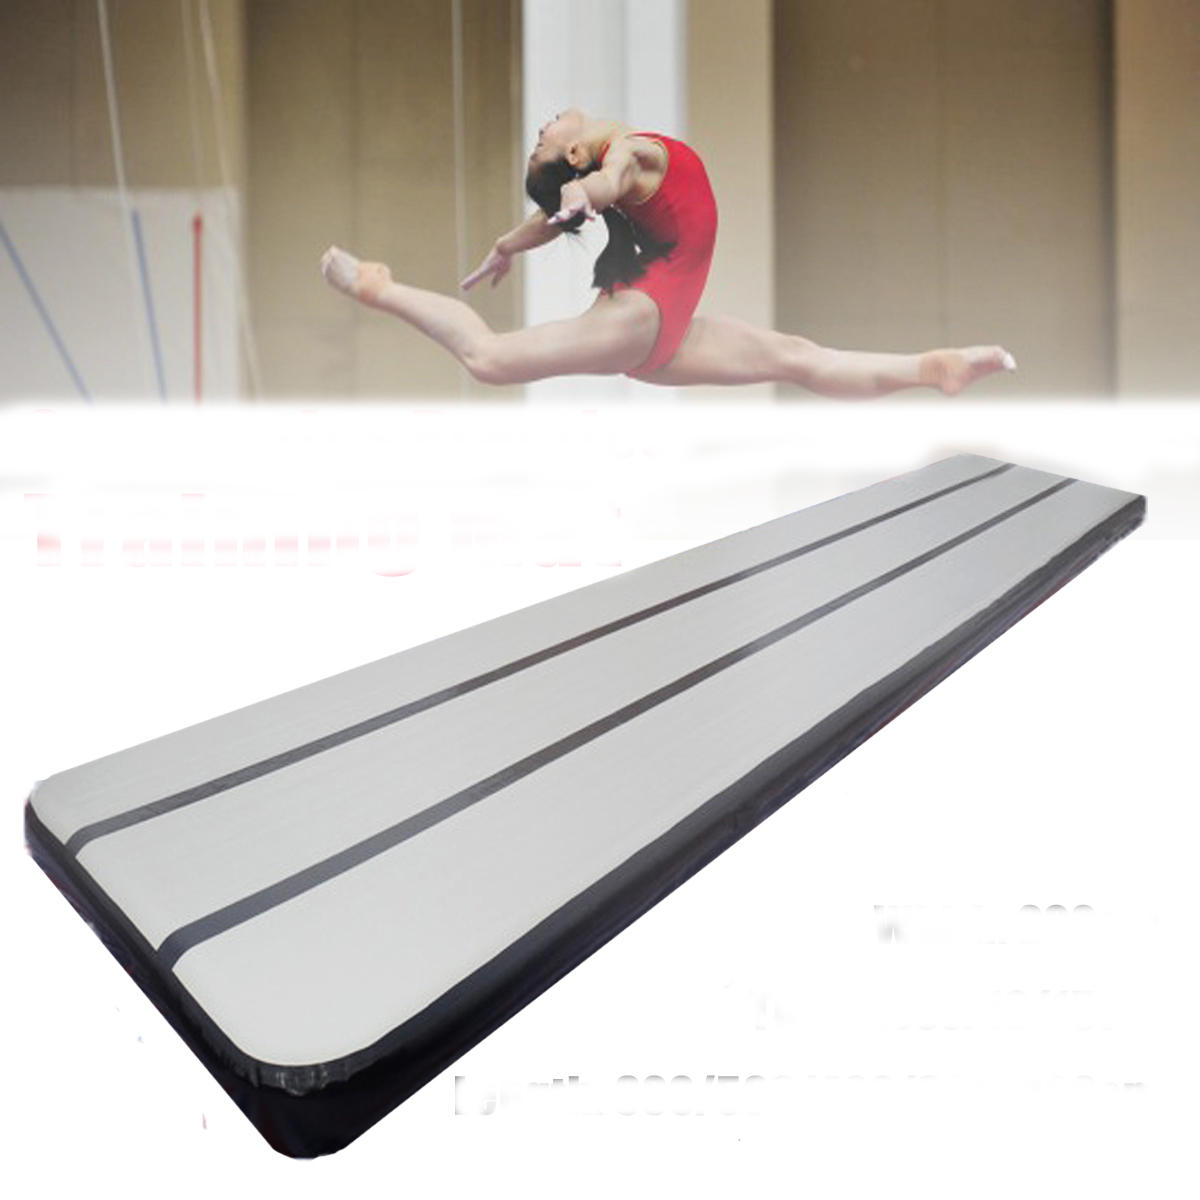 236.22x78.7x3.9inch Inflatable Air Track Gymnastics Practice Training Mat Tumbling Pad